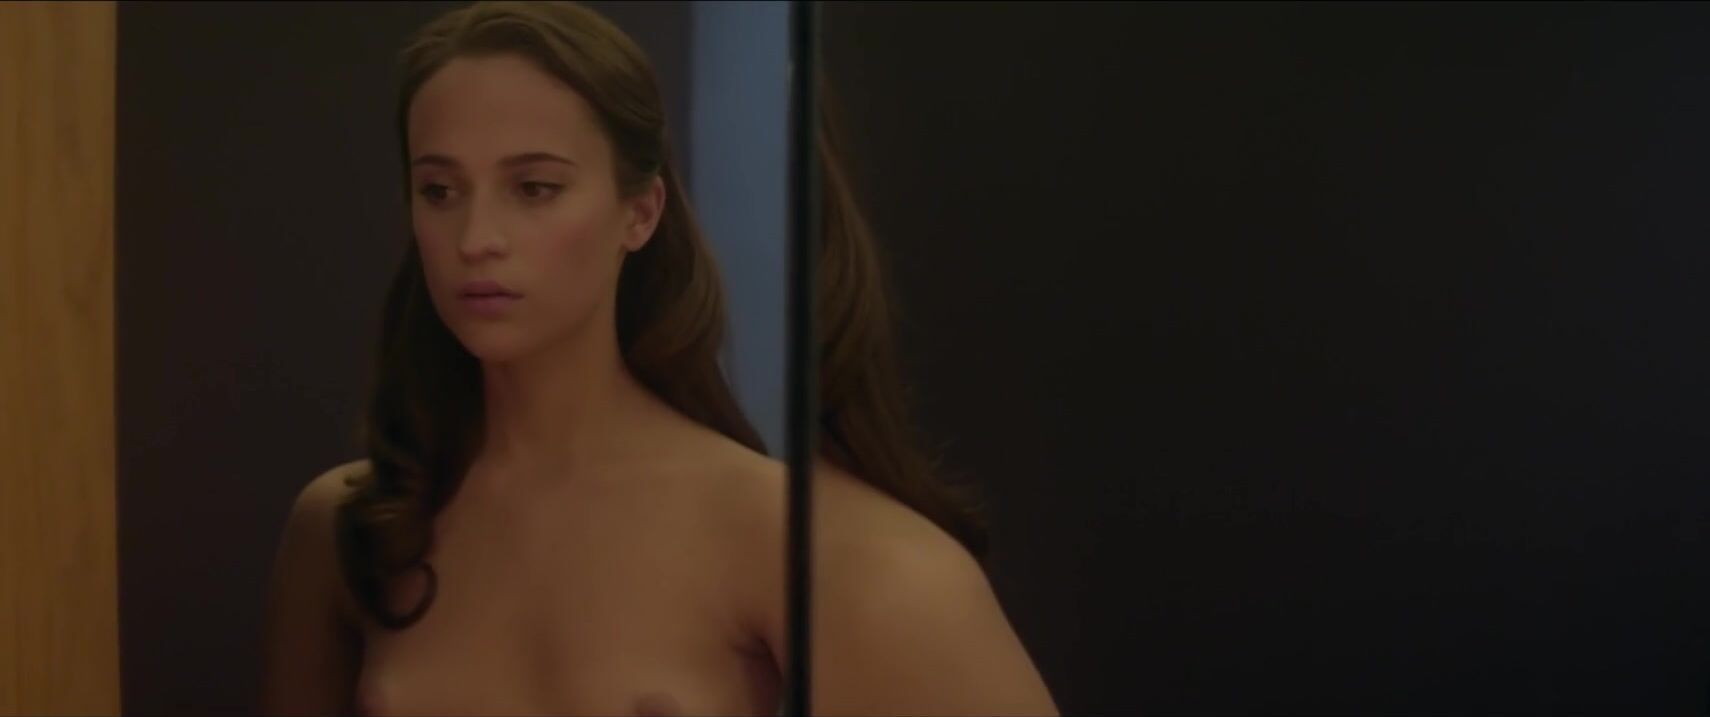 Sarah Vandella Naked Alicia Vikander loves being sexy in feature film moment from Ex Machina (2015) BananaBunny